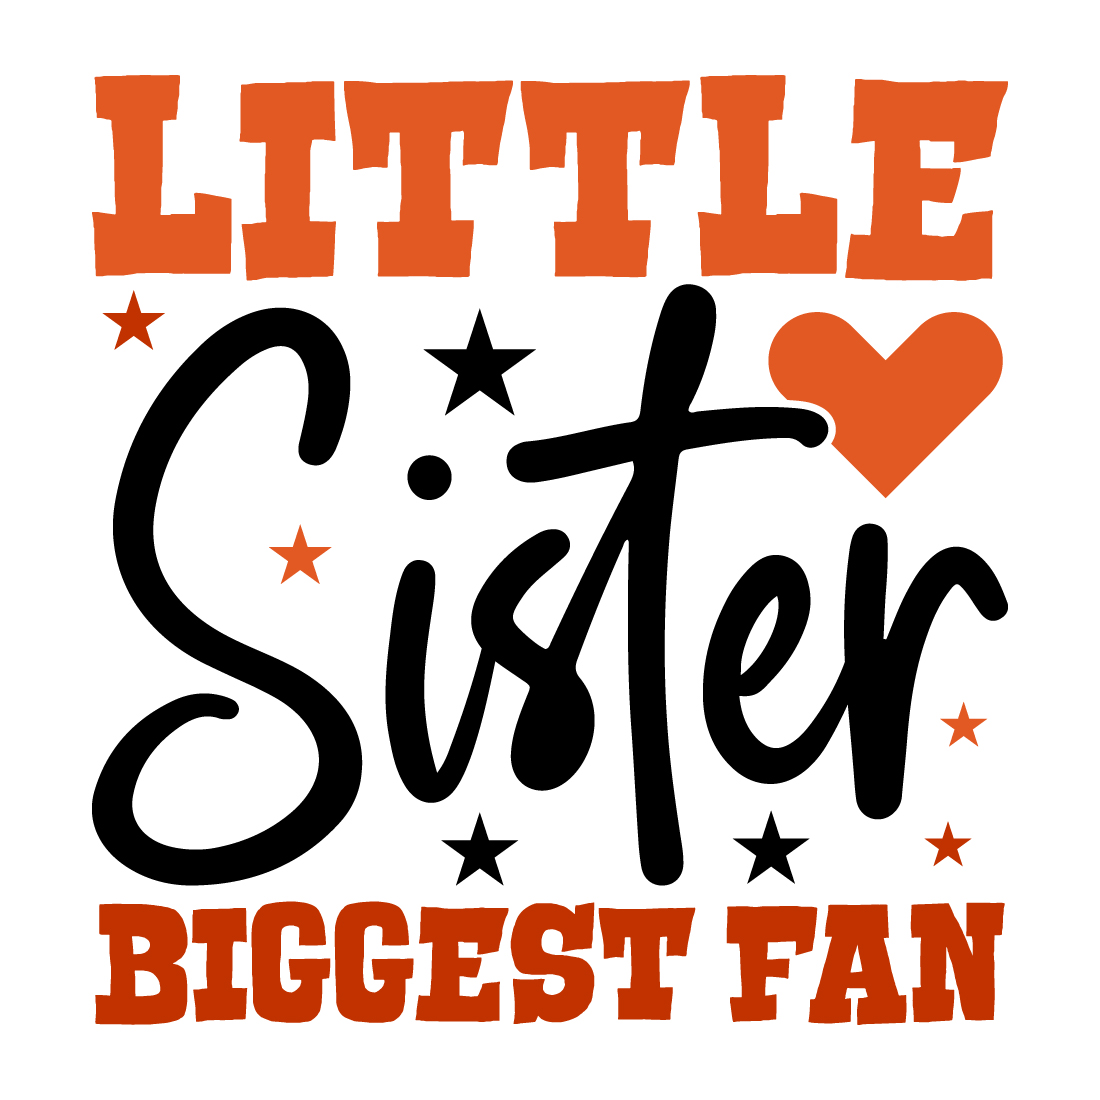 Little Sister Biggest Fan preview image.